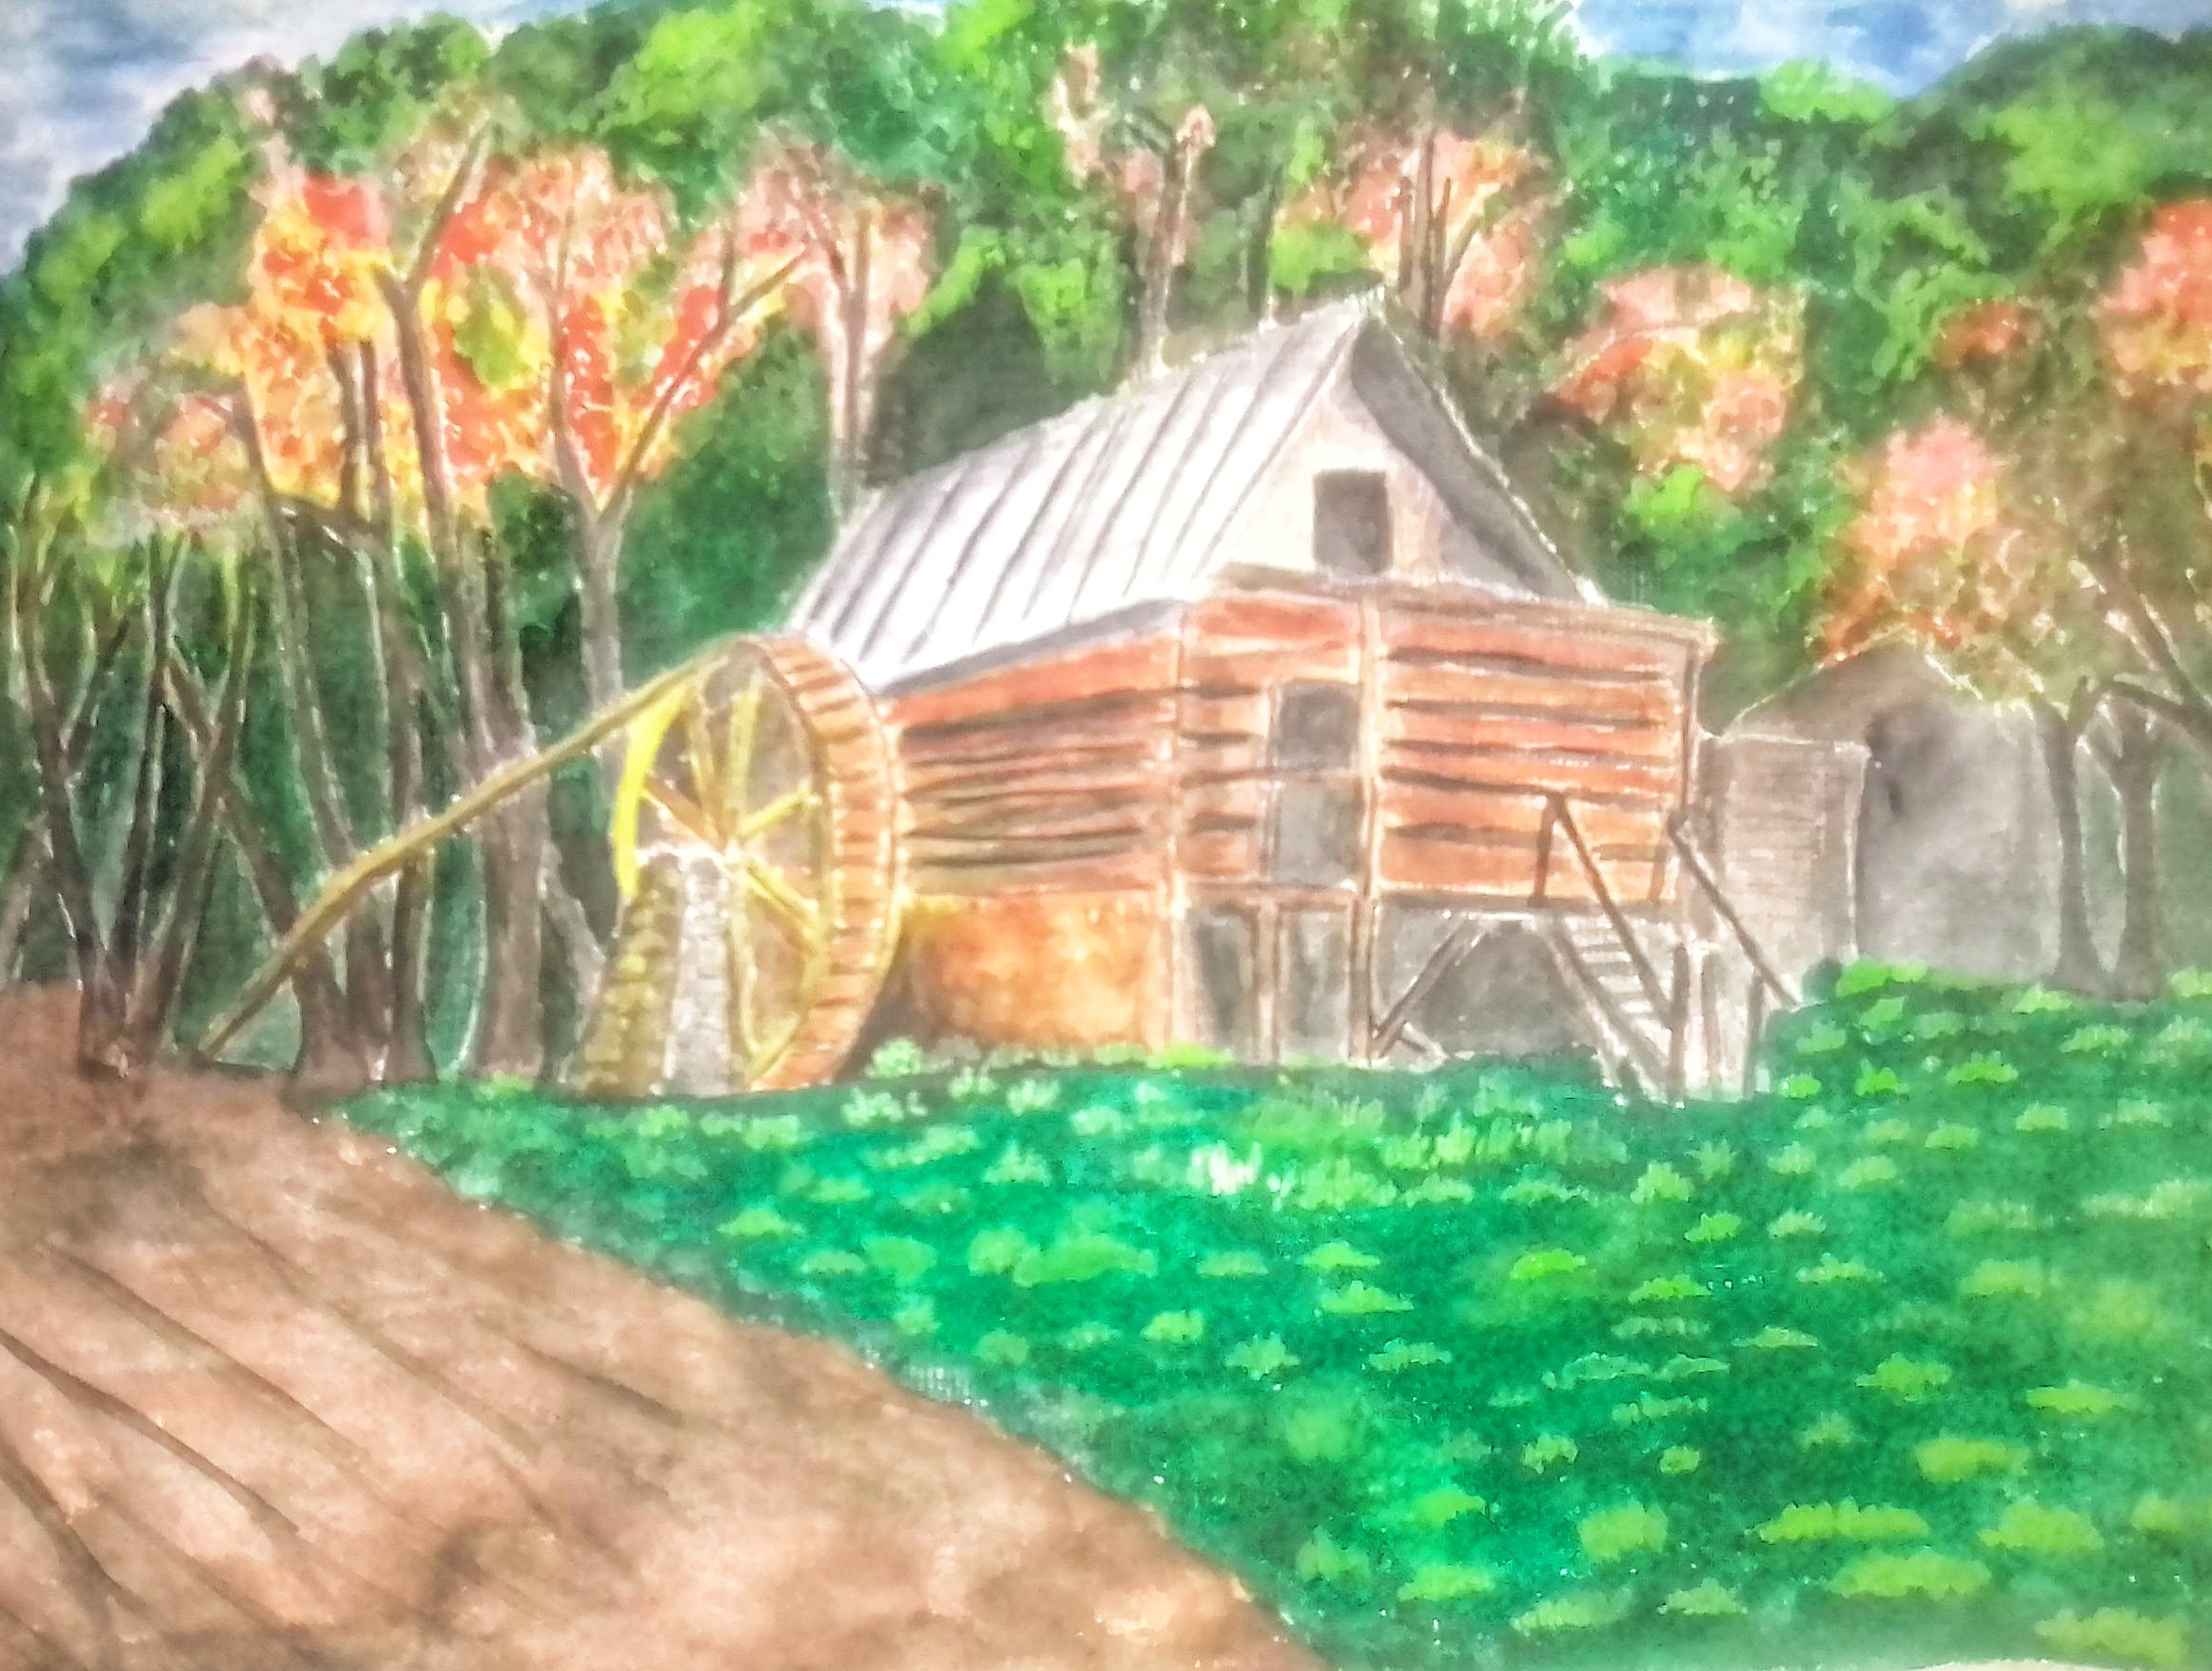 The Mill in the Forest by L.A.R.Harsha De Silva